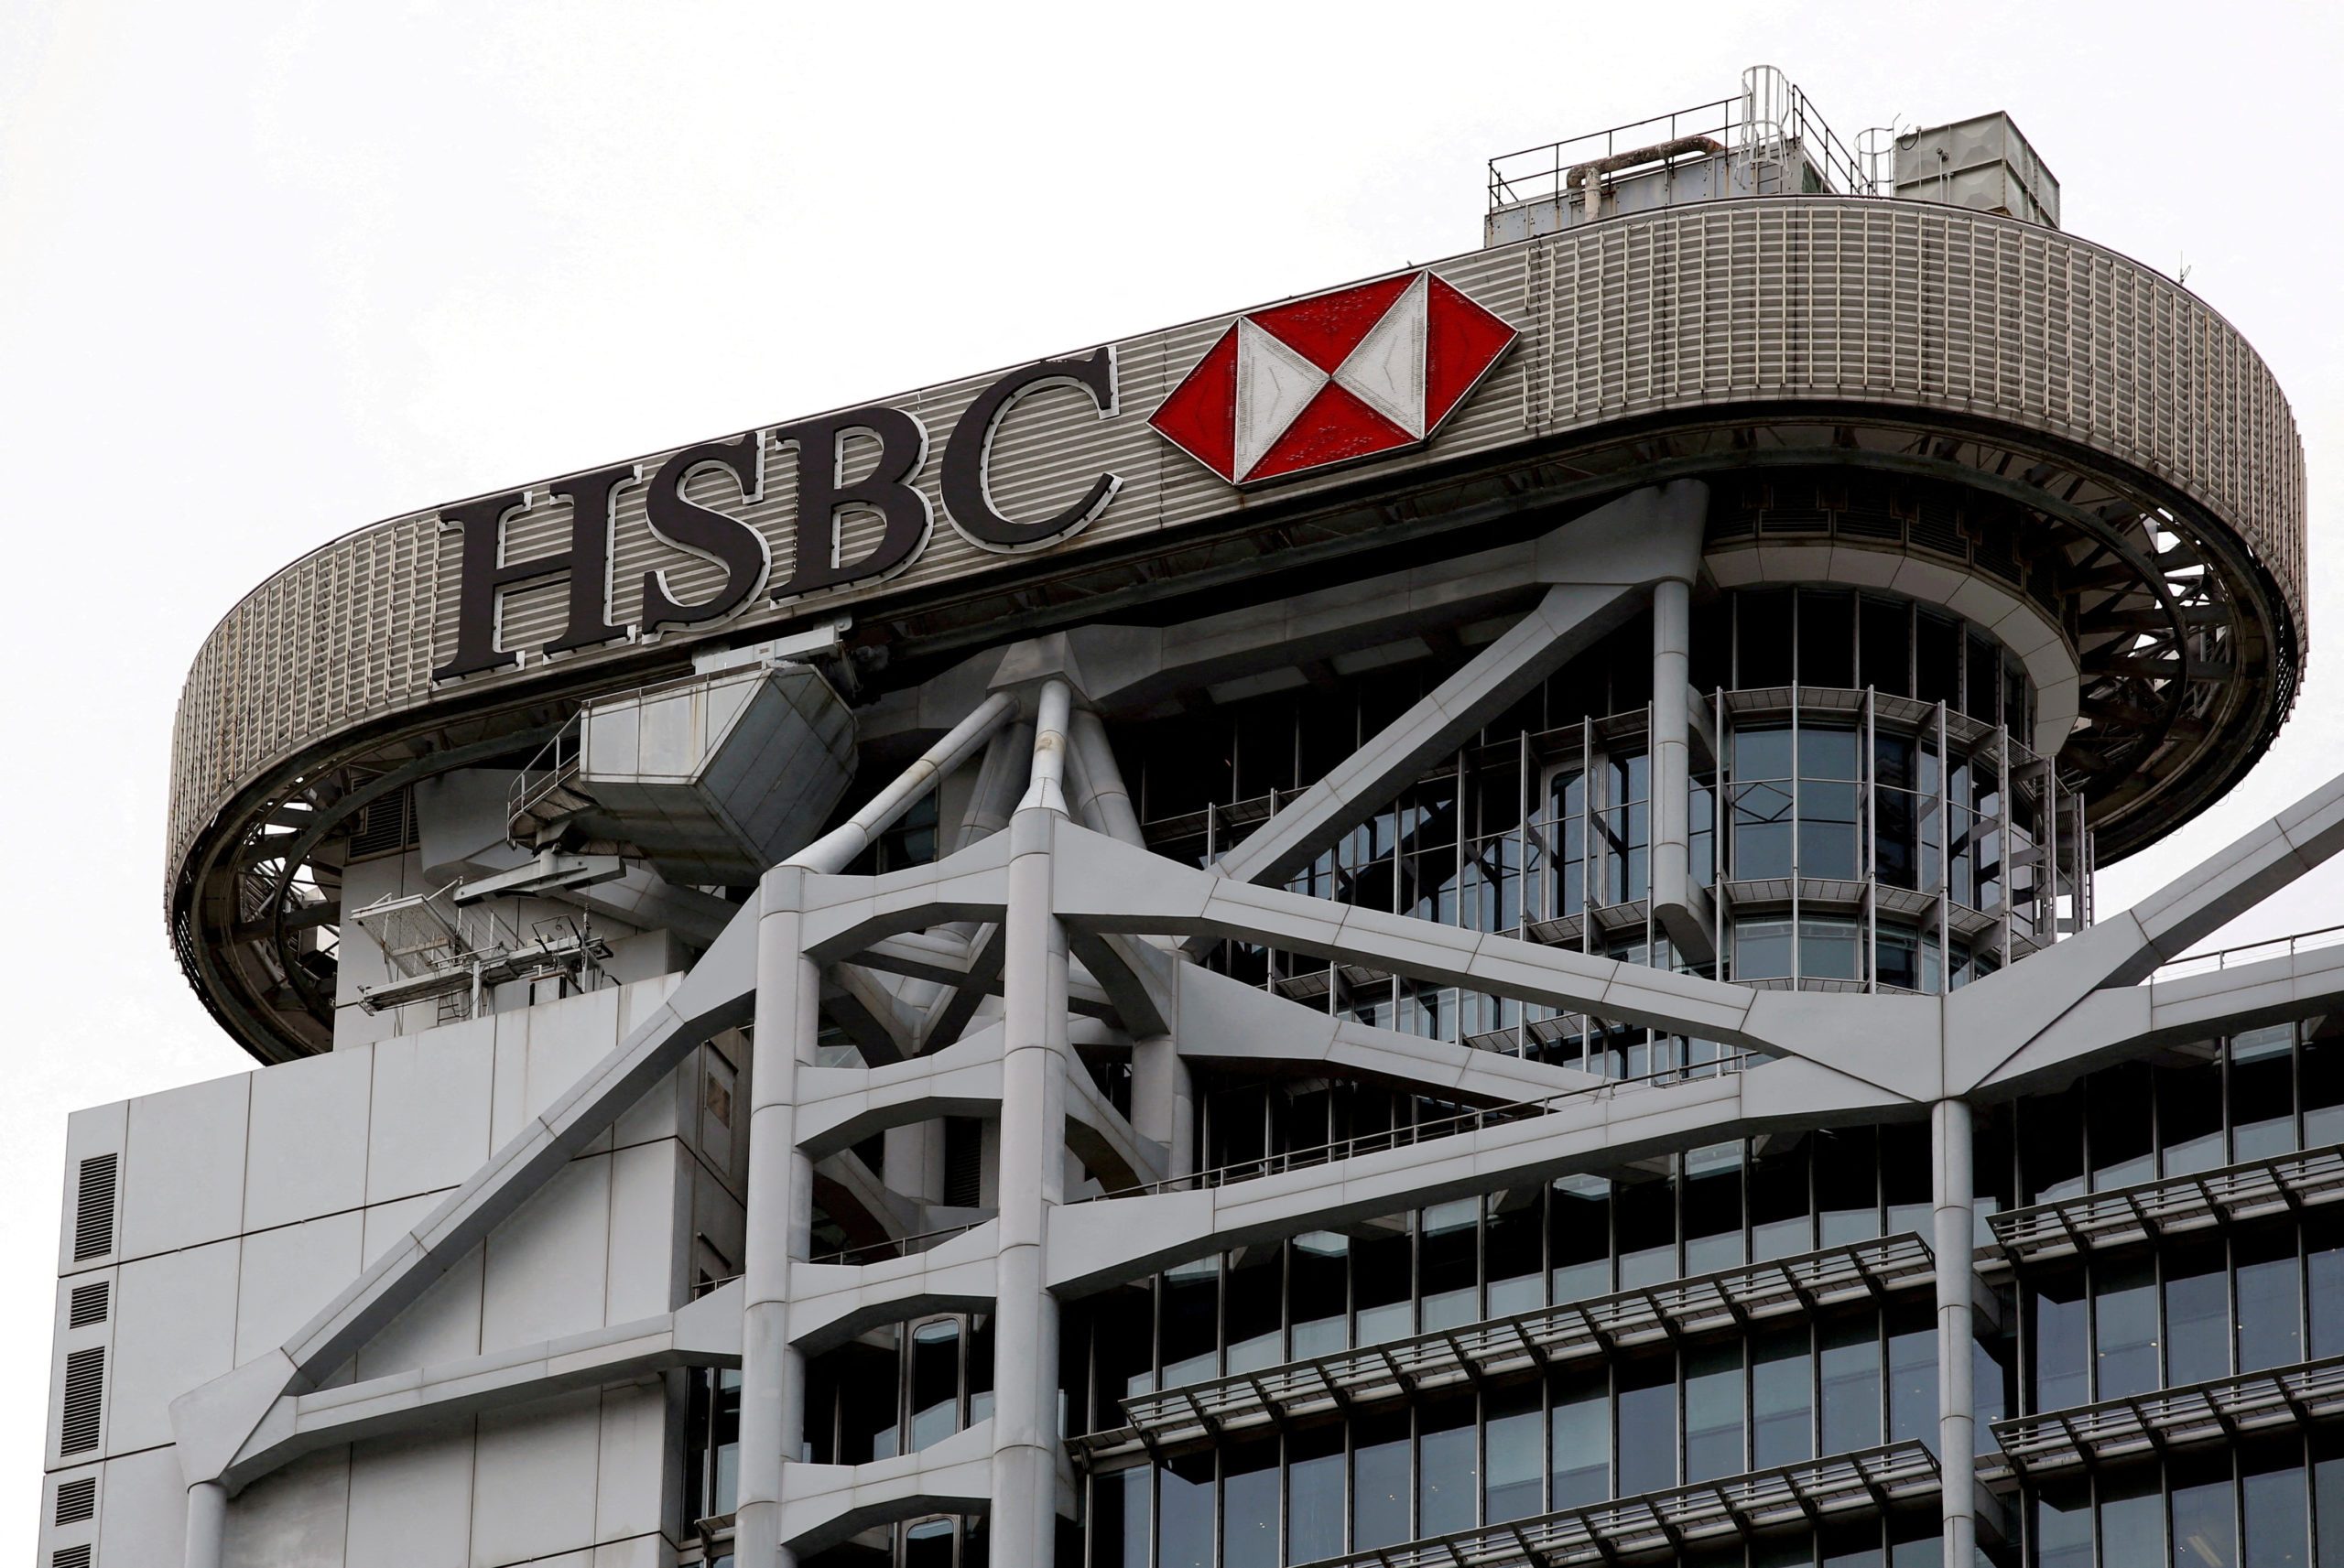 HSBC shareholders should vote against Ping An's Asia spinoff plan, says advisor ISS